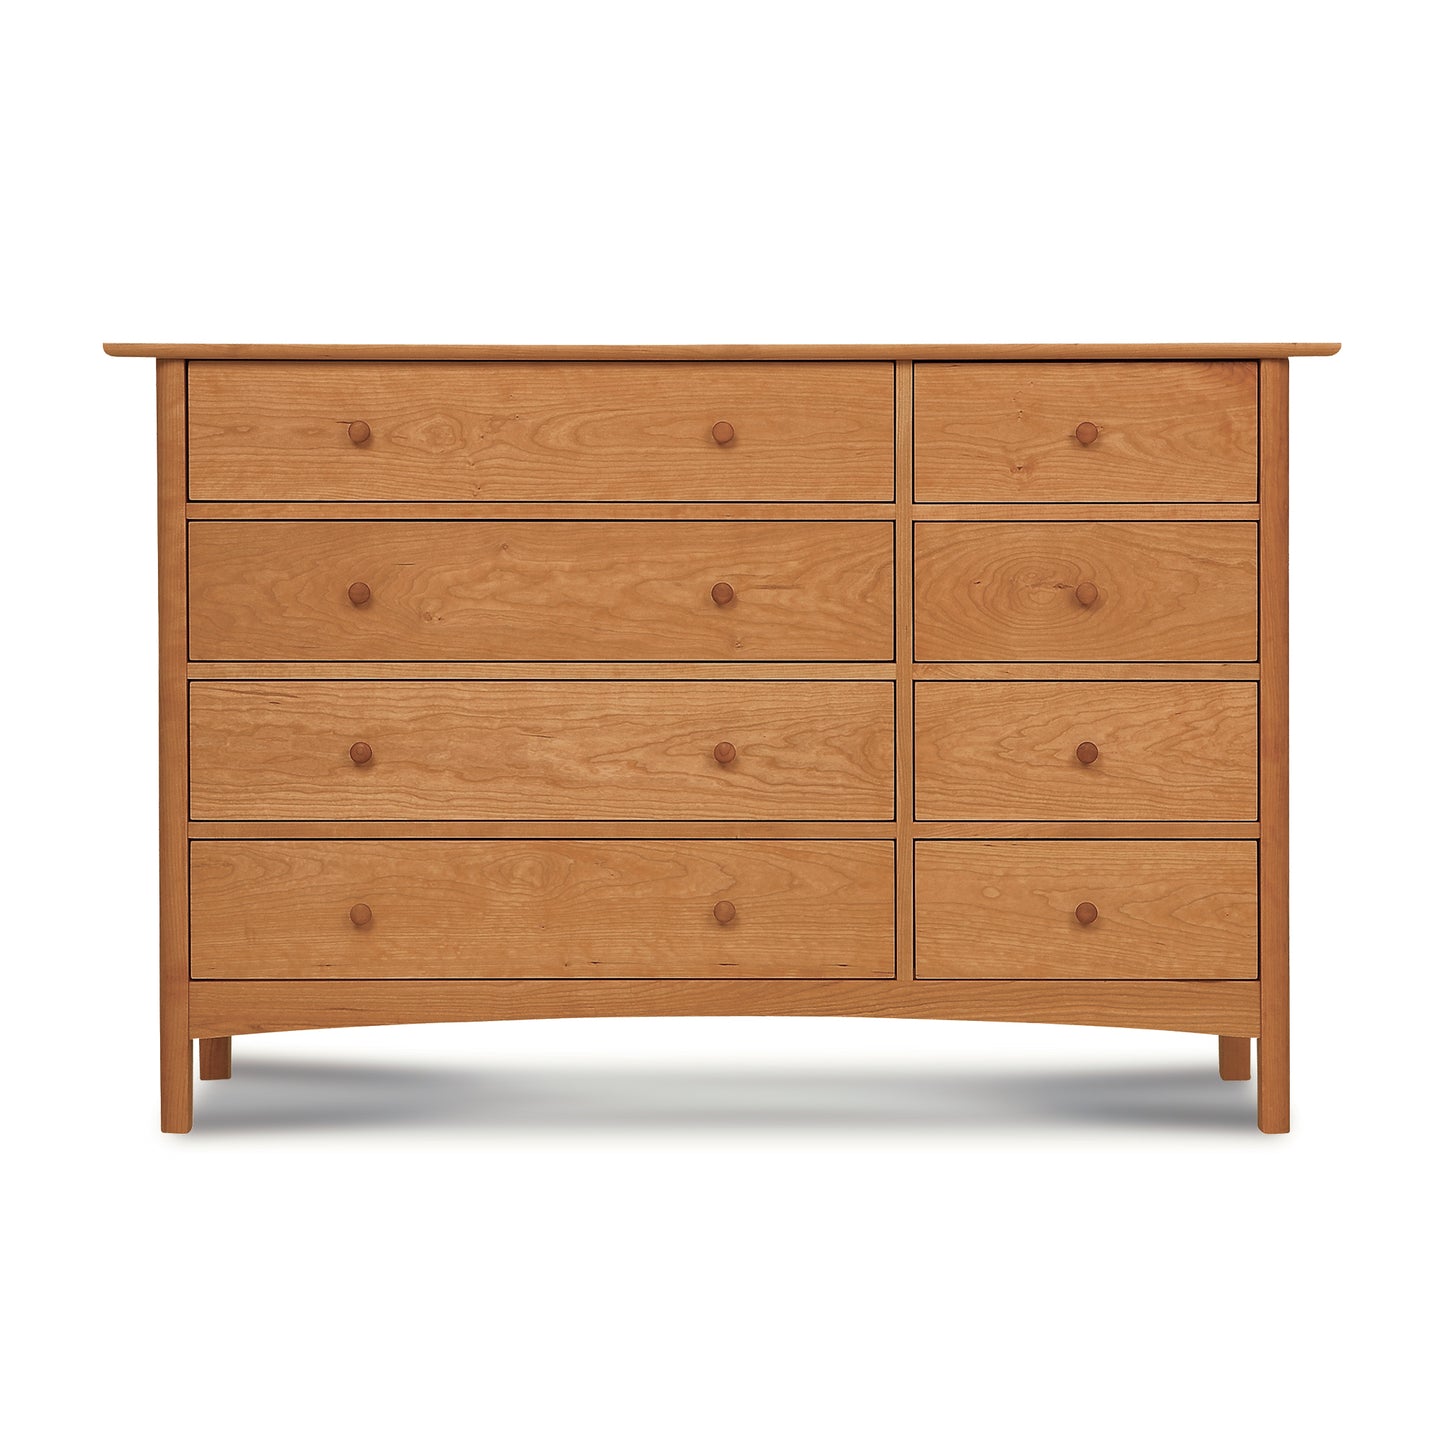 Heartwood Shaker 8-Drawer Dresser #2 in solid hardwood furniture by Vermont Furniture Designs with six drawers against a white background.